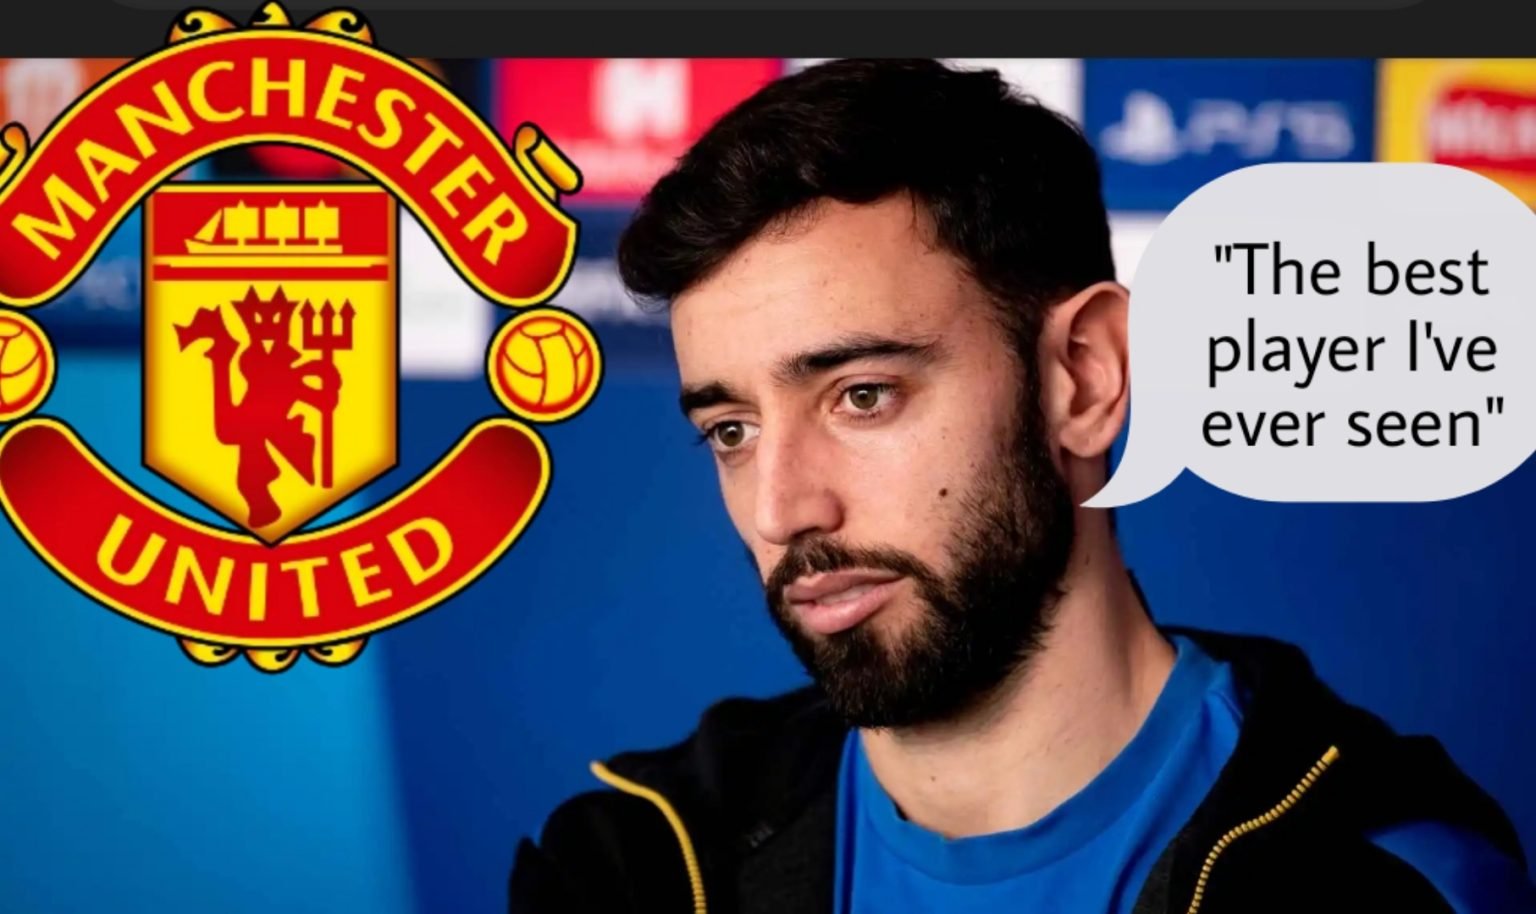 “We can’t lie to ourselves…He’s the man of the moment, nobody in Premier League comes close to him”: Bruno Fernandes praises Man United team-mate after his Ballon D’or performance against Everton